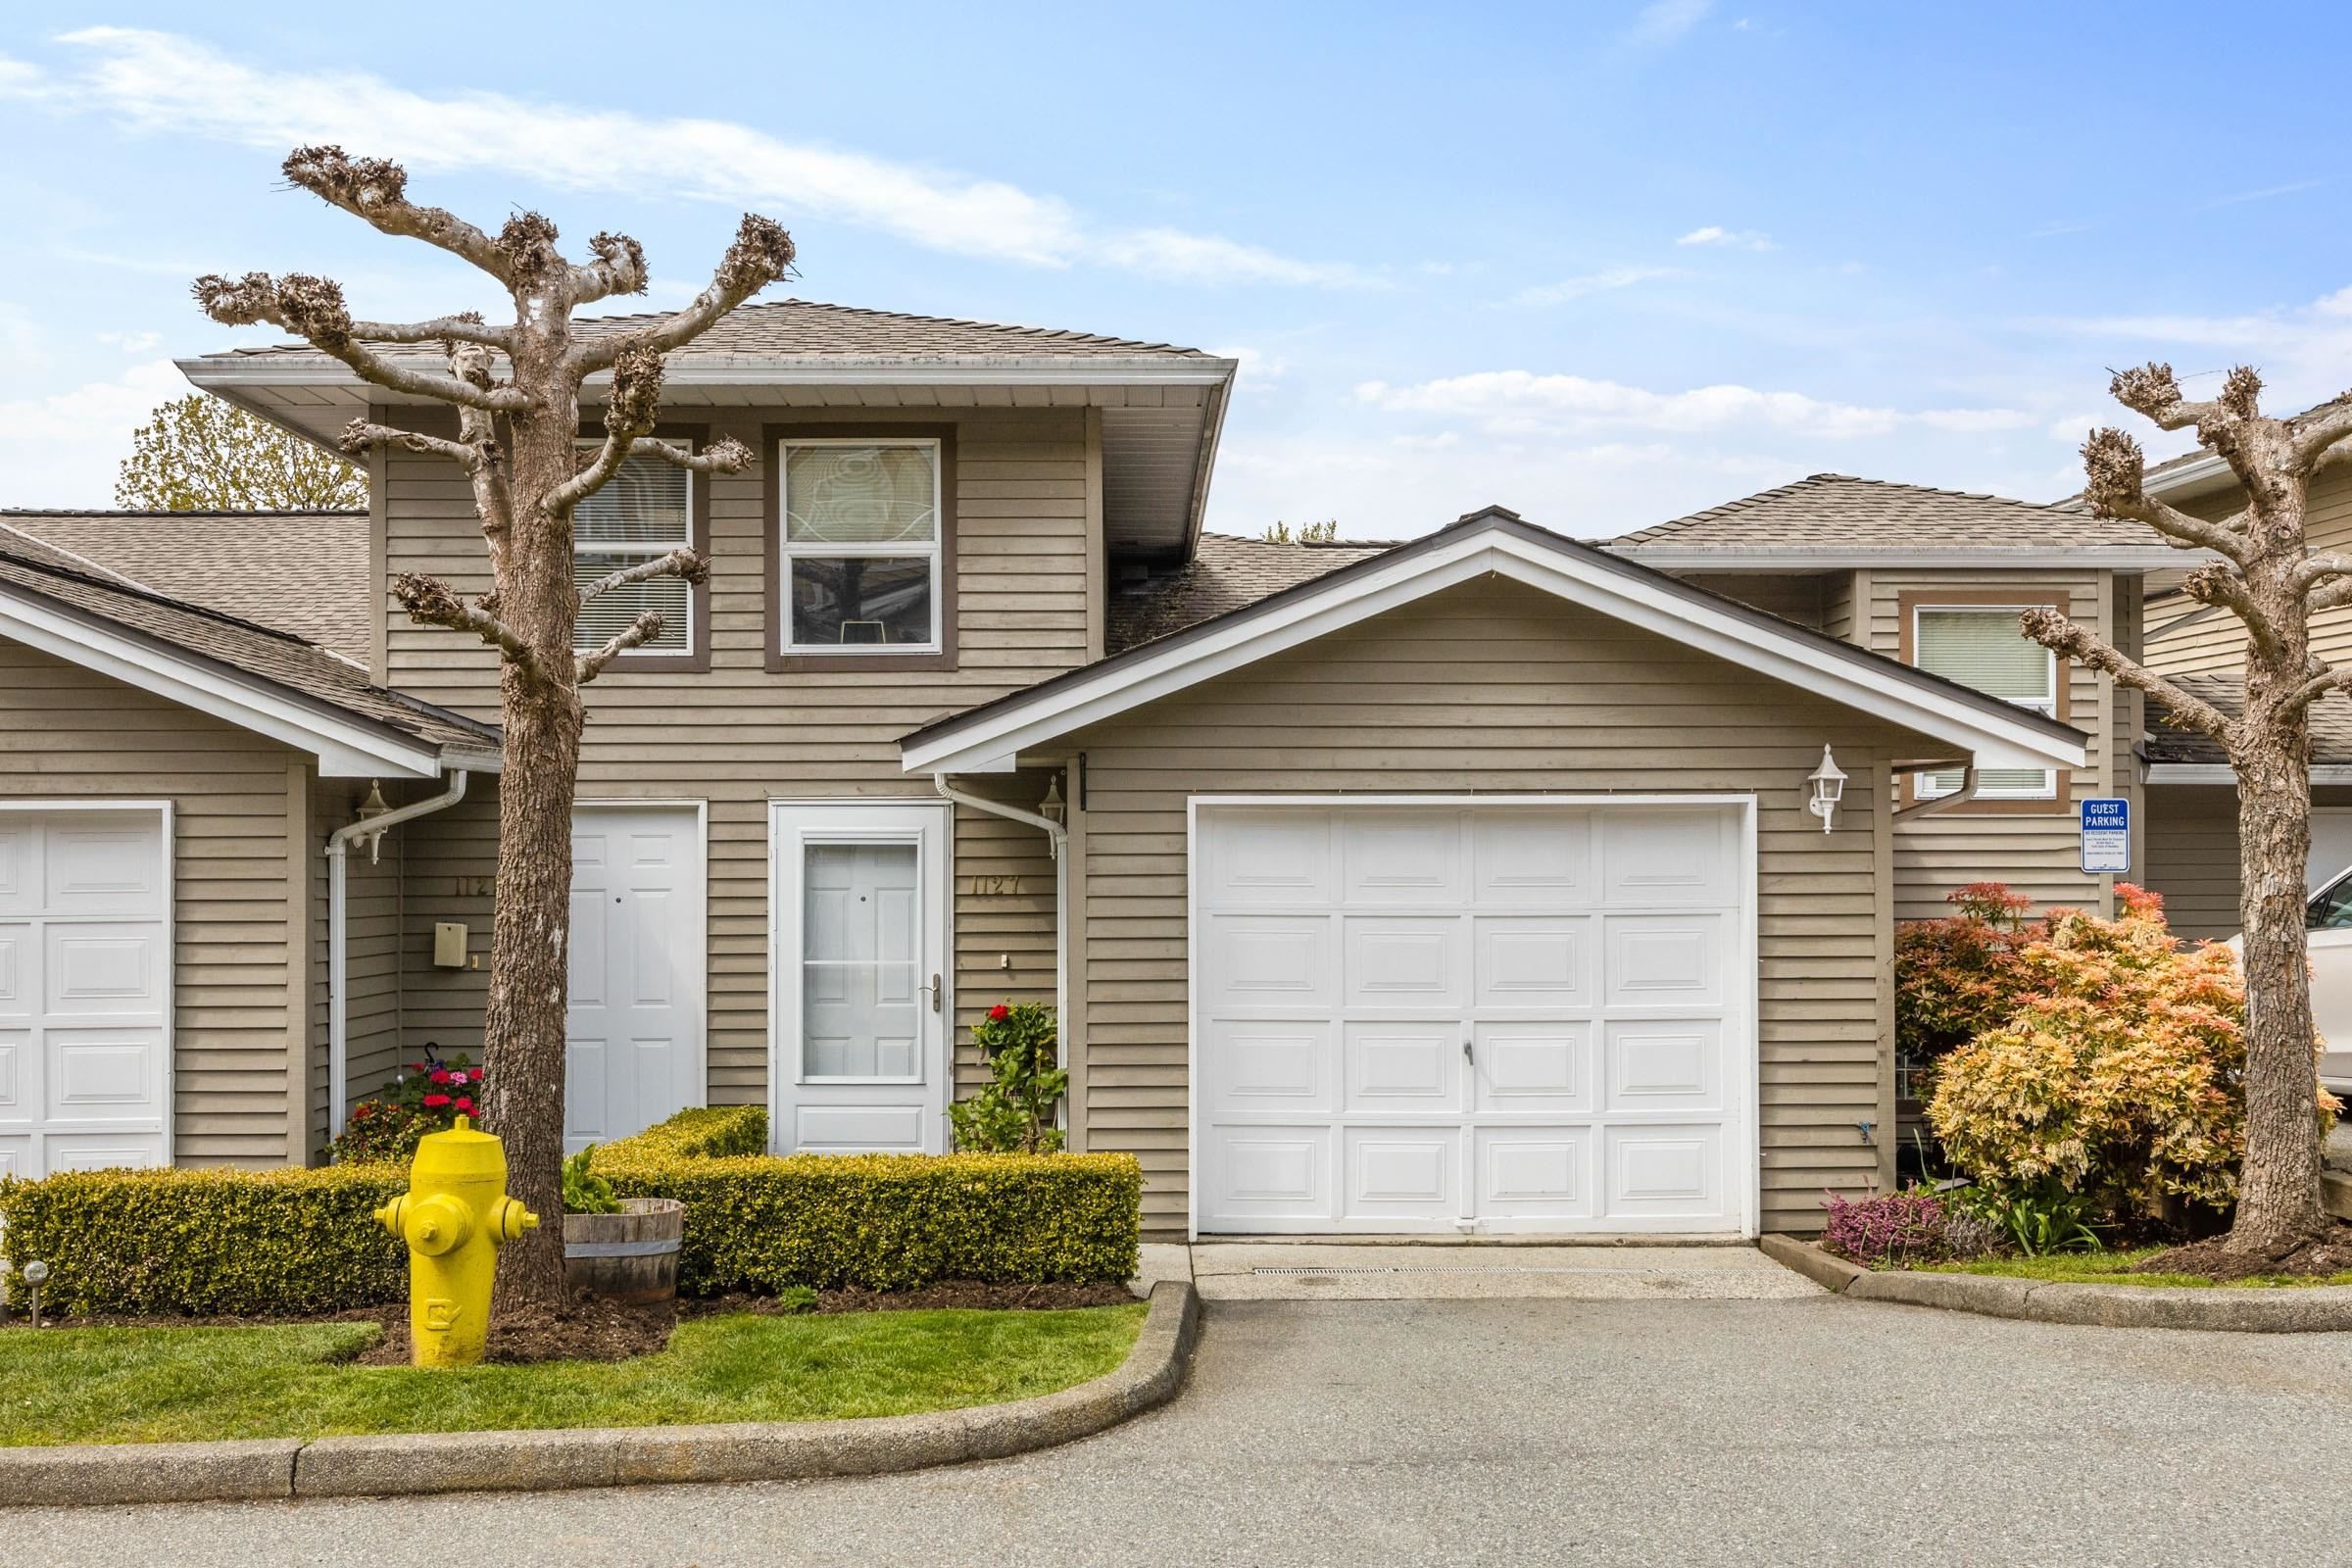 This property has sold: 1127 O'FLAHERTY GATE in Port Coquitlam